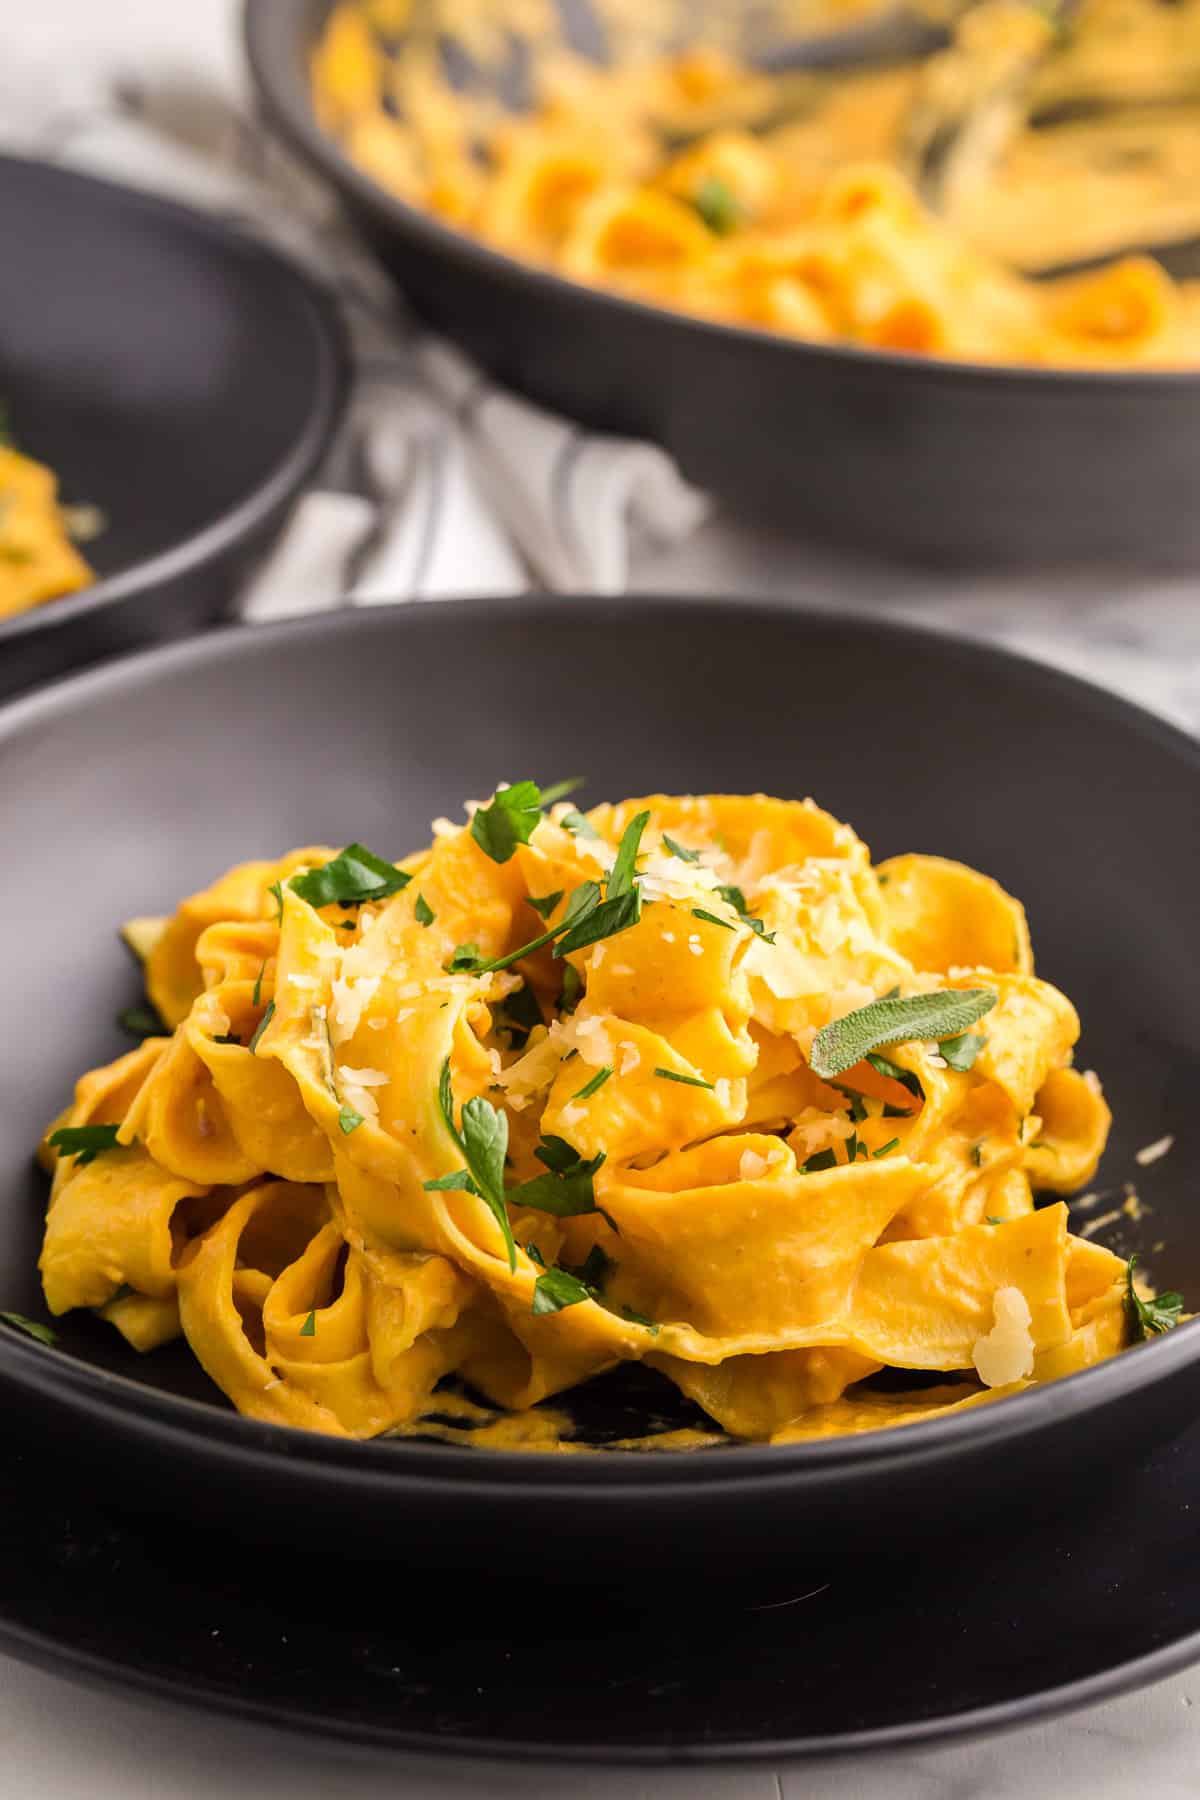 pappardelle pasta coated in a pumpkin cream sauce